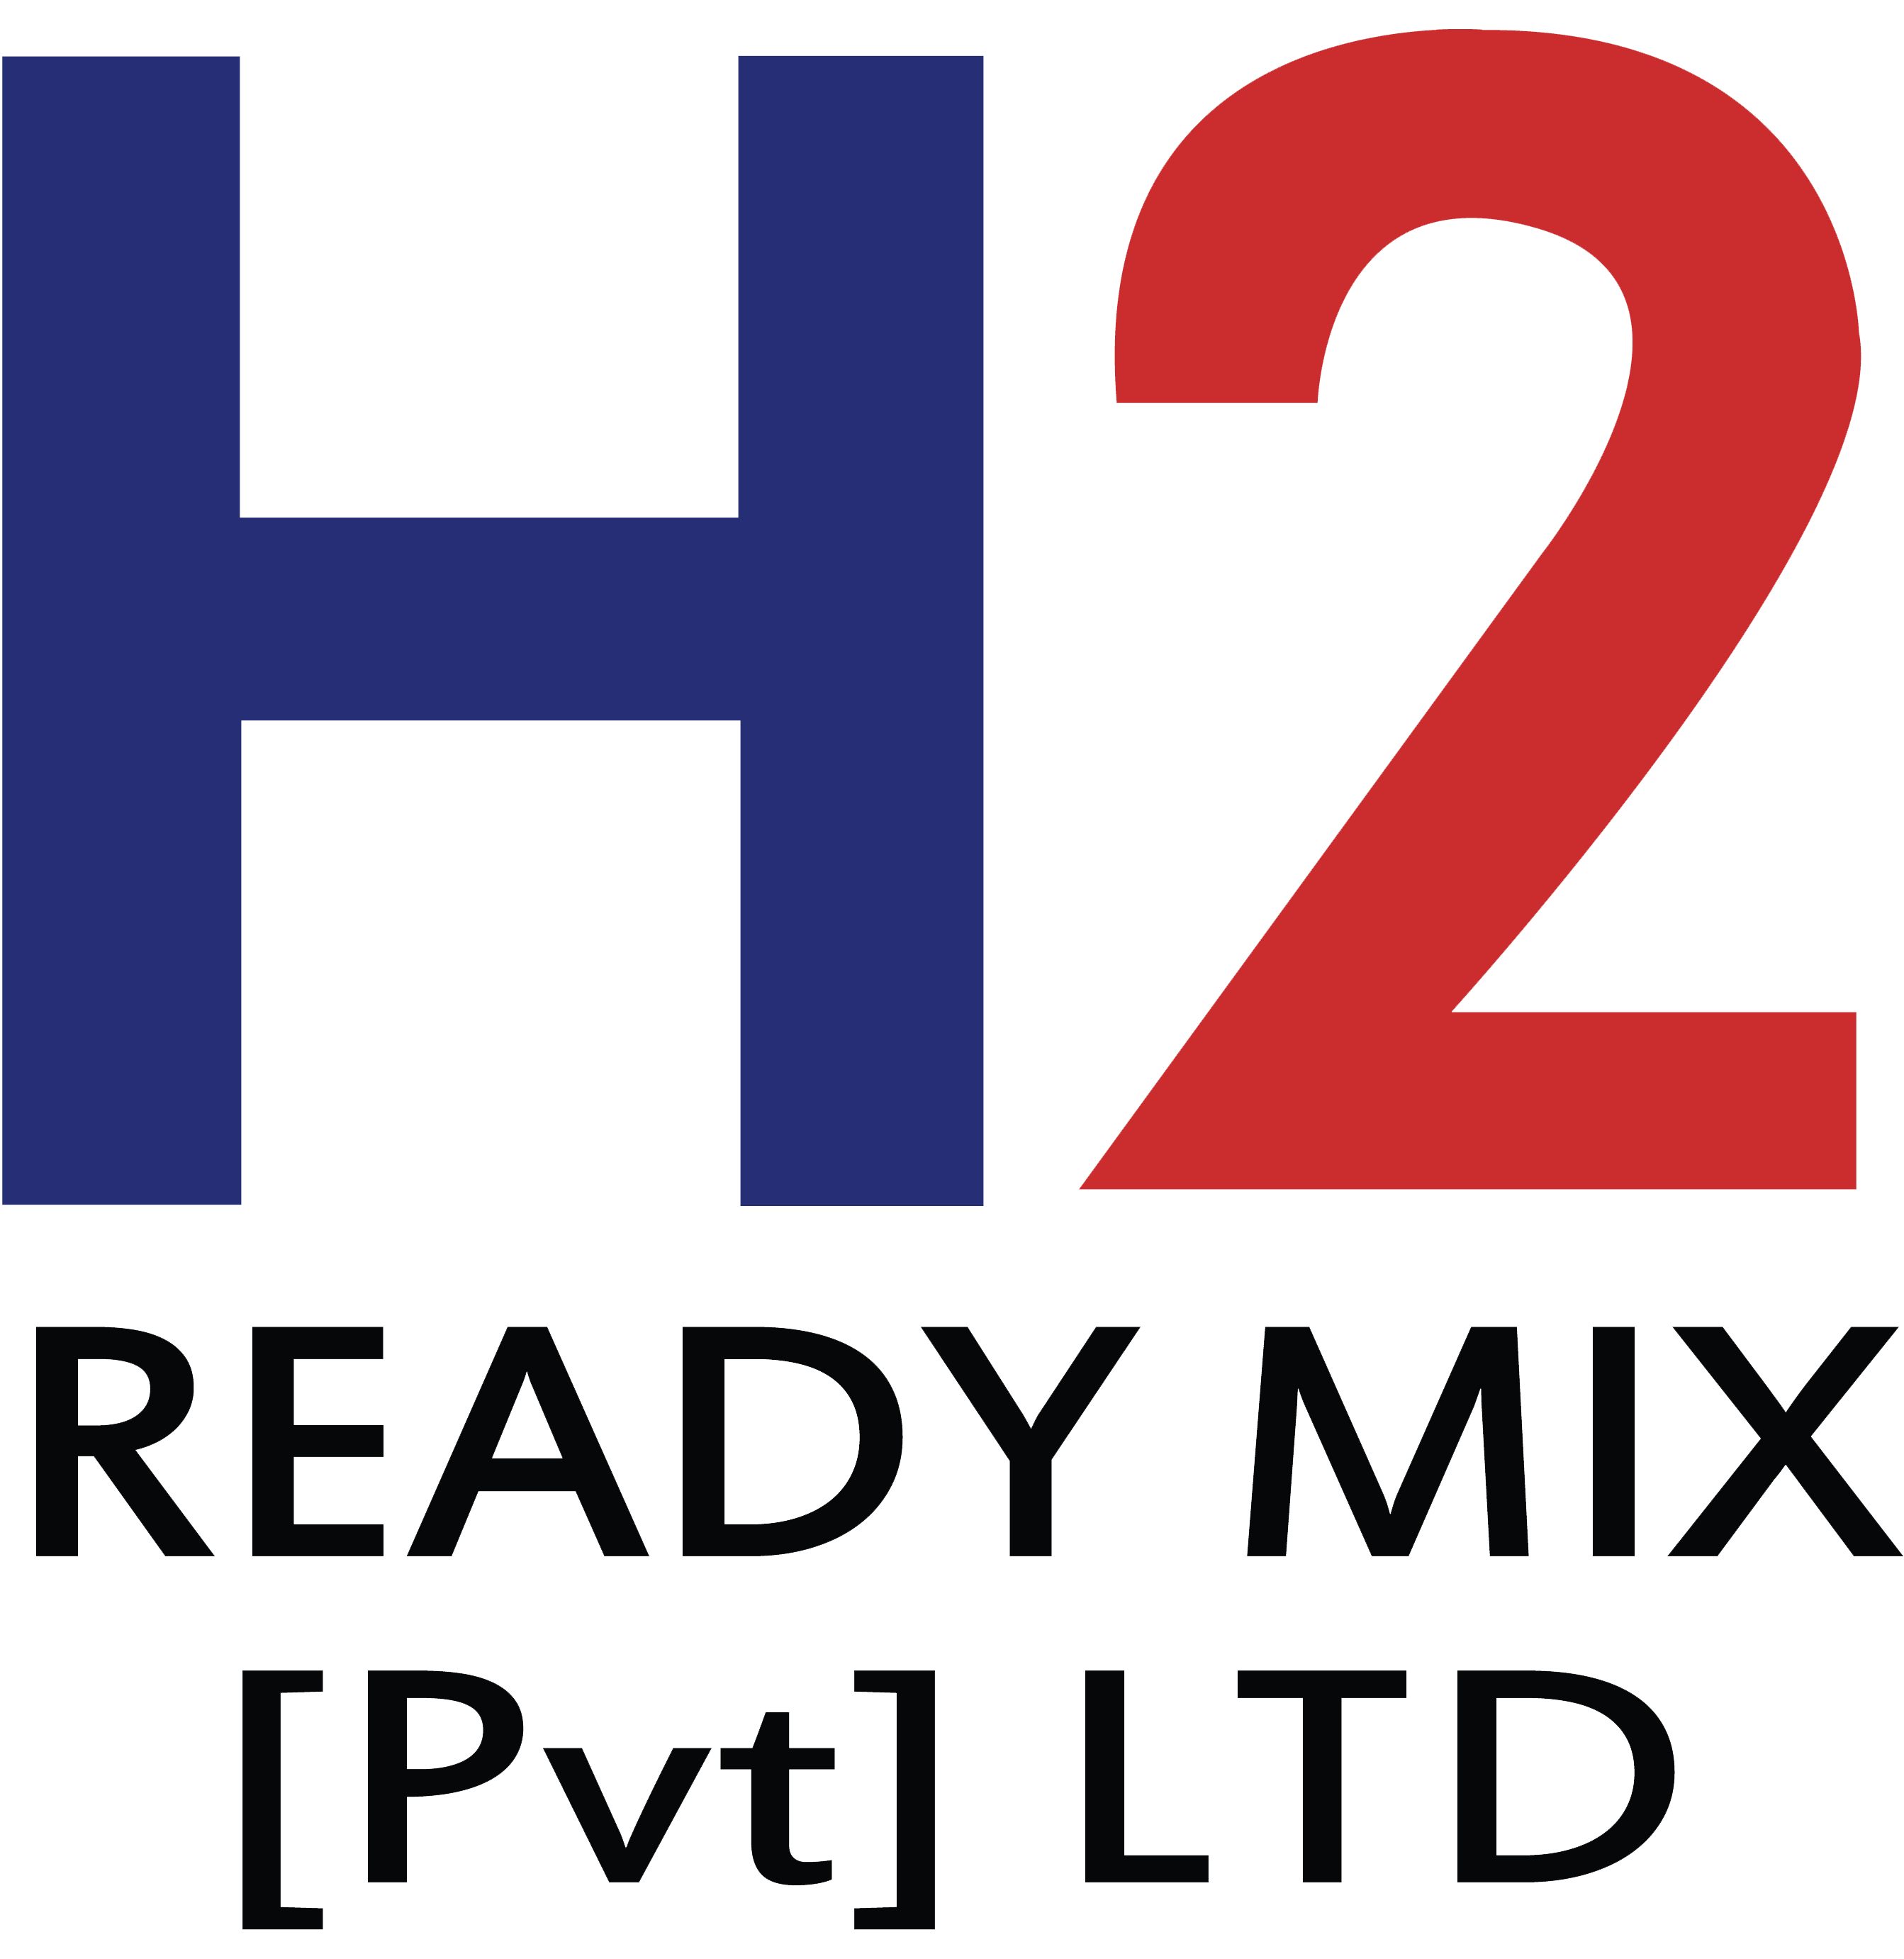 H2 Ready Mix, Concrete Ready Mixed Manufacturers & Suppliers in Karachi, Pakistan.